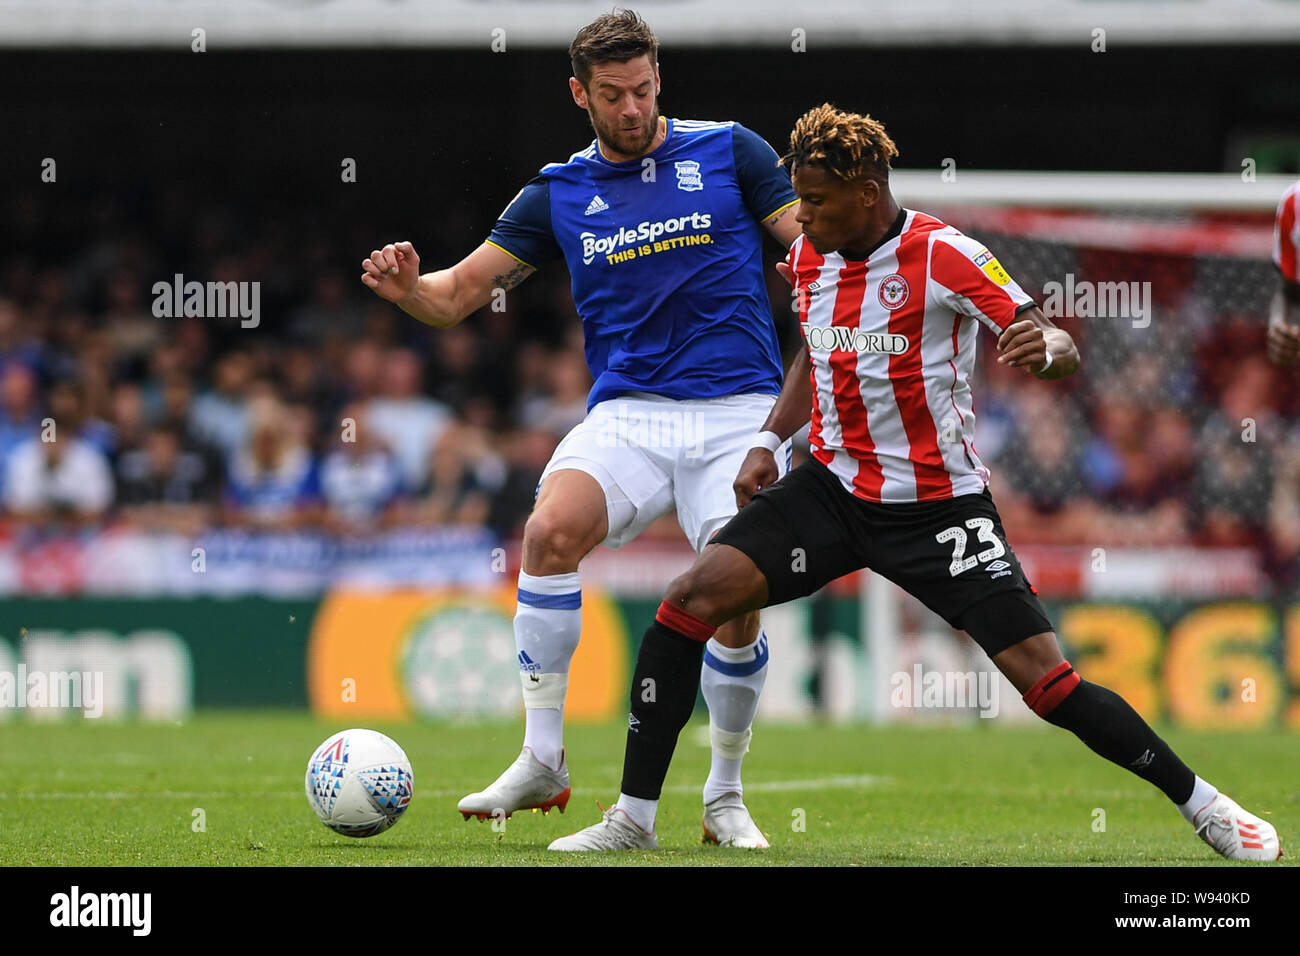 3rd August 2019 , Griffin Park, London, England; Sky Bet Championship, Brentford vs Birmingham City  ; Julian Jeanvier (23) of Brentford takes on a player Credit: Phil Westlake/News Images, Stock Photo